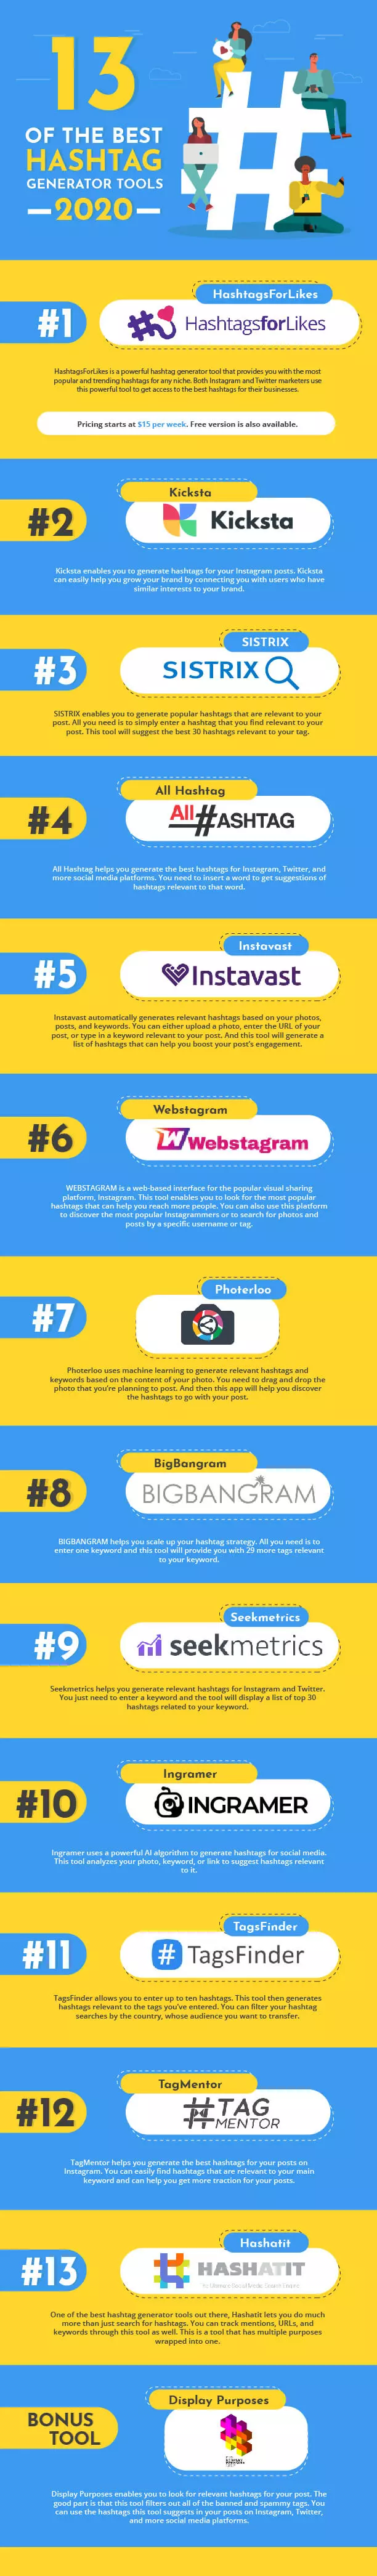 The Best Instagram Hashtag Generator Tools You Can Use